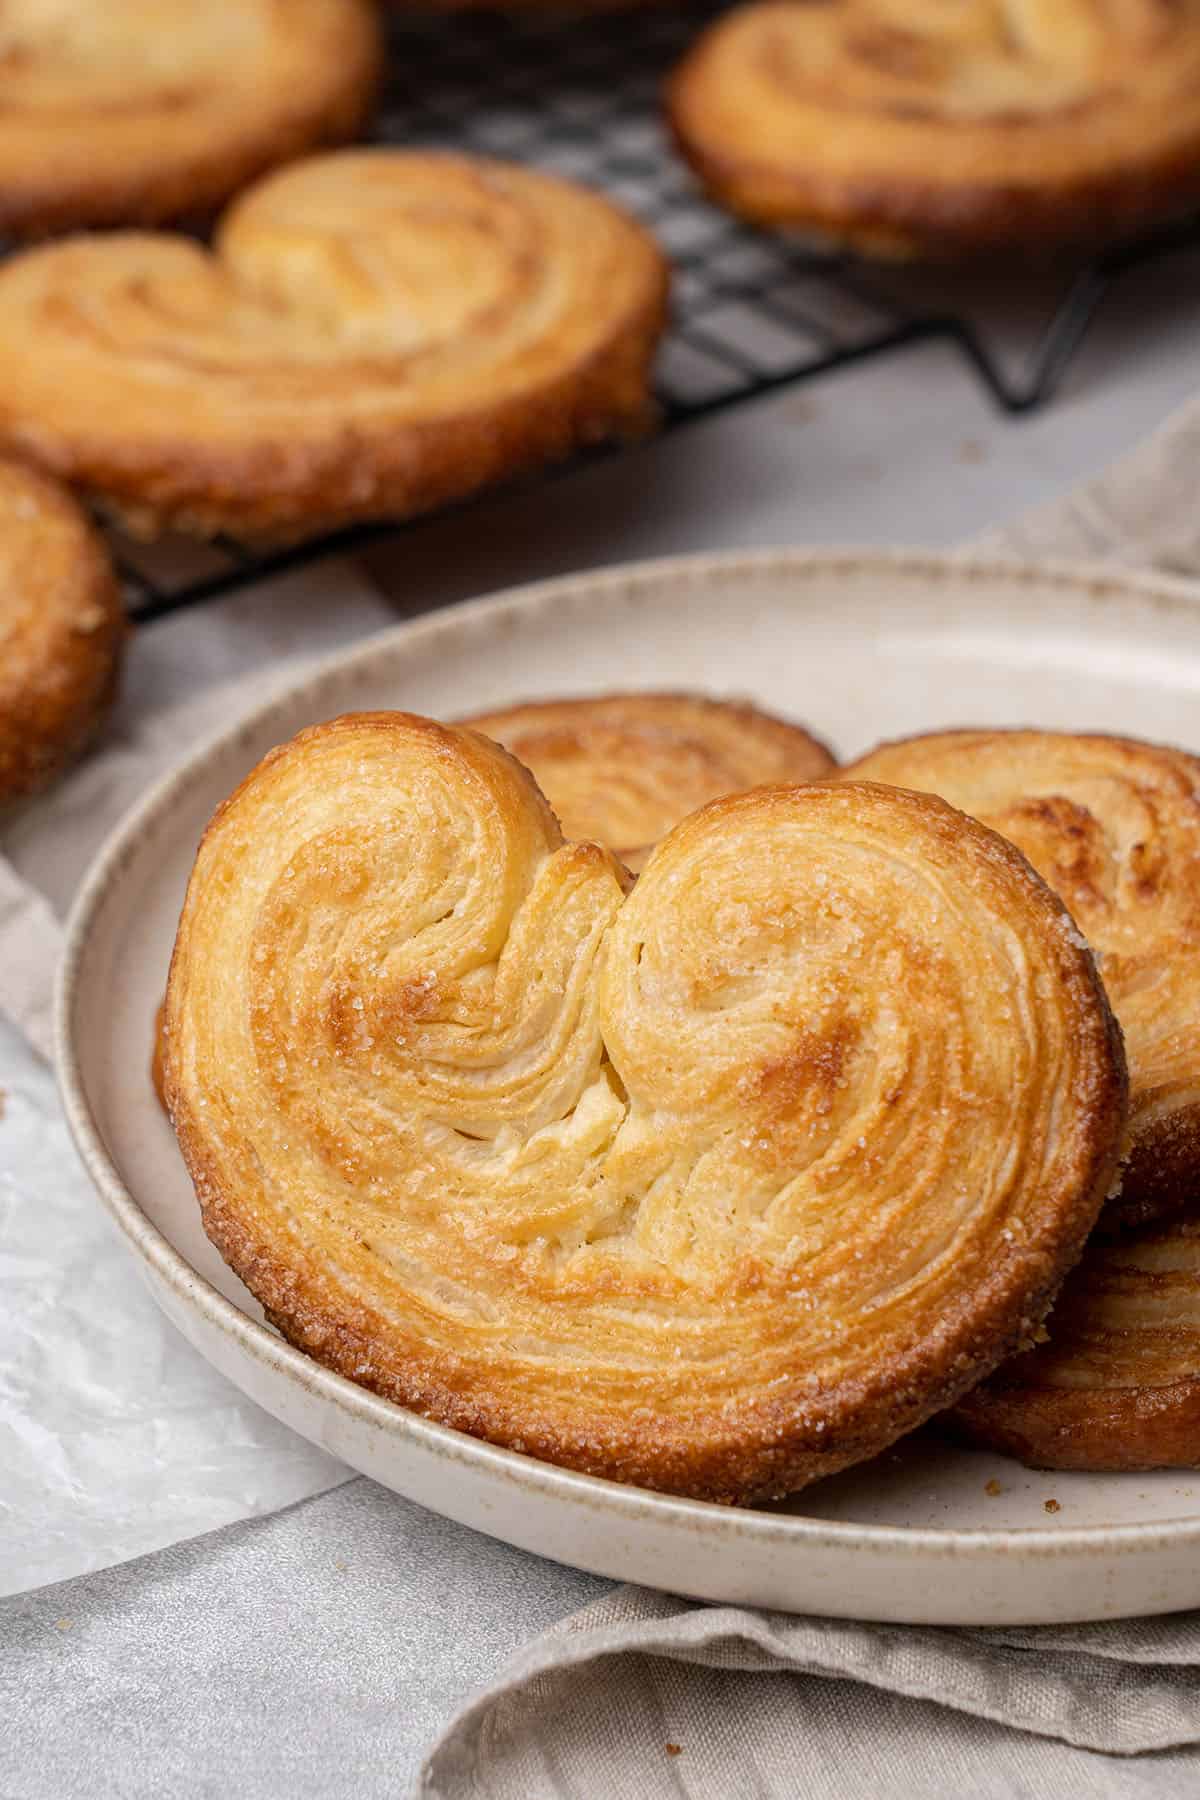 Baked palmiers on a plate.